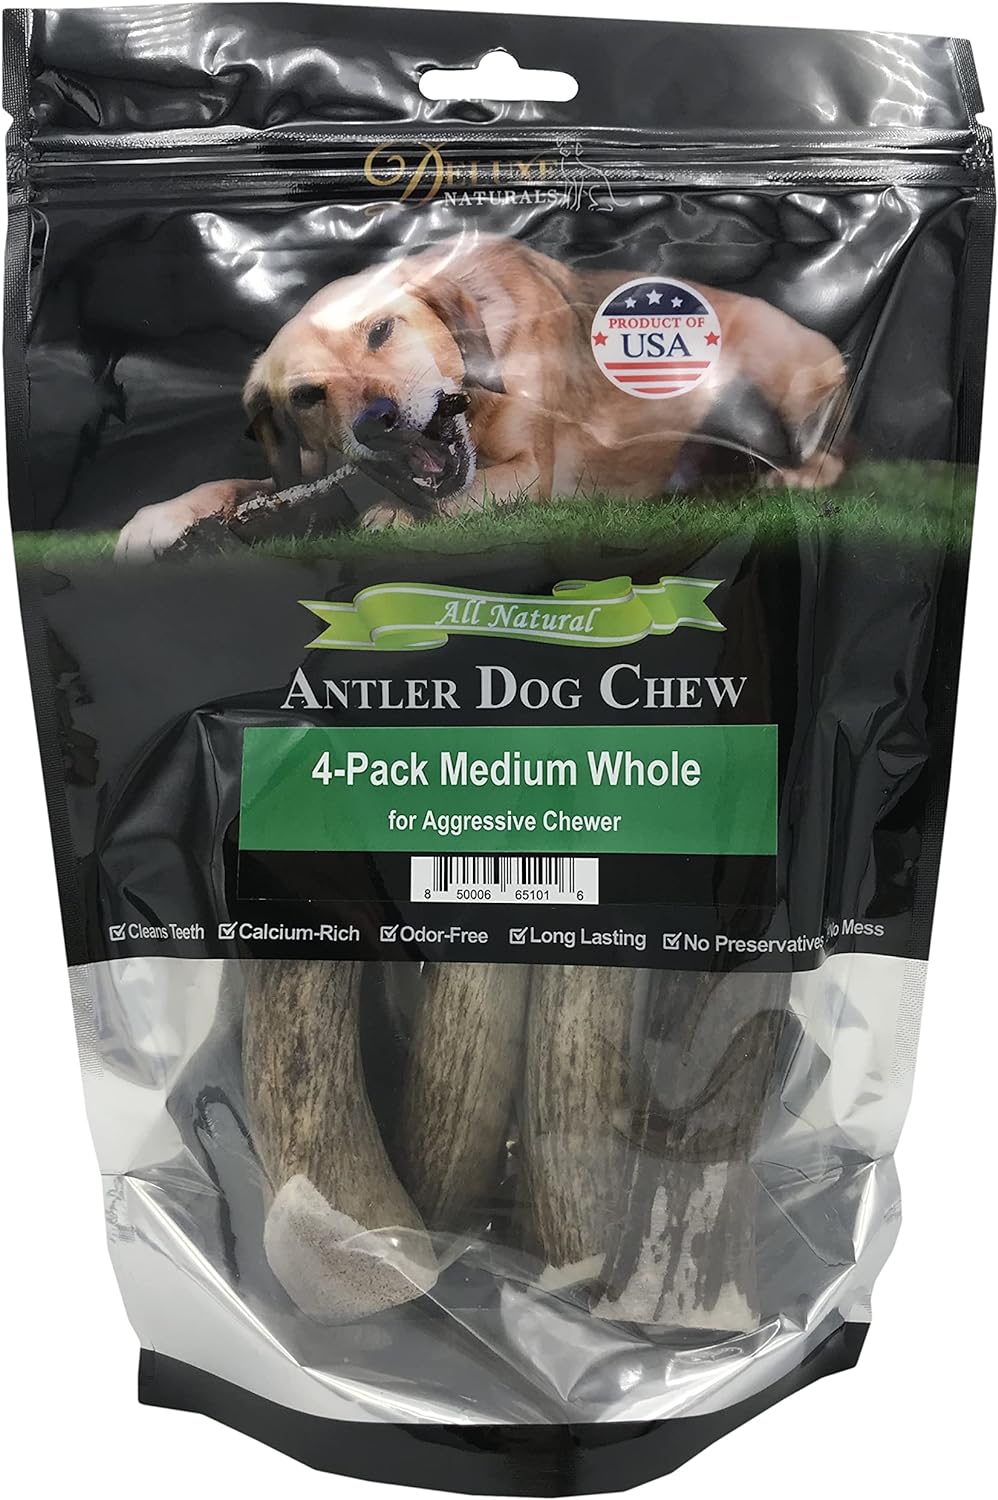 Deluxe Naturals Elk Antler Chews for Dogs | Naturally Shed USA Collected Elk Antlers | All Natural A-Grade Premium Elk Antler Dog Chews | Product of USA, 4-Pack Medium Whole : Pet Supplies